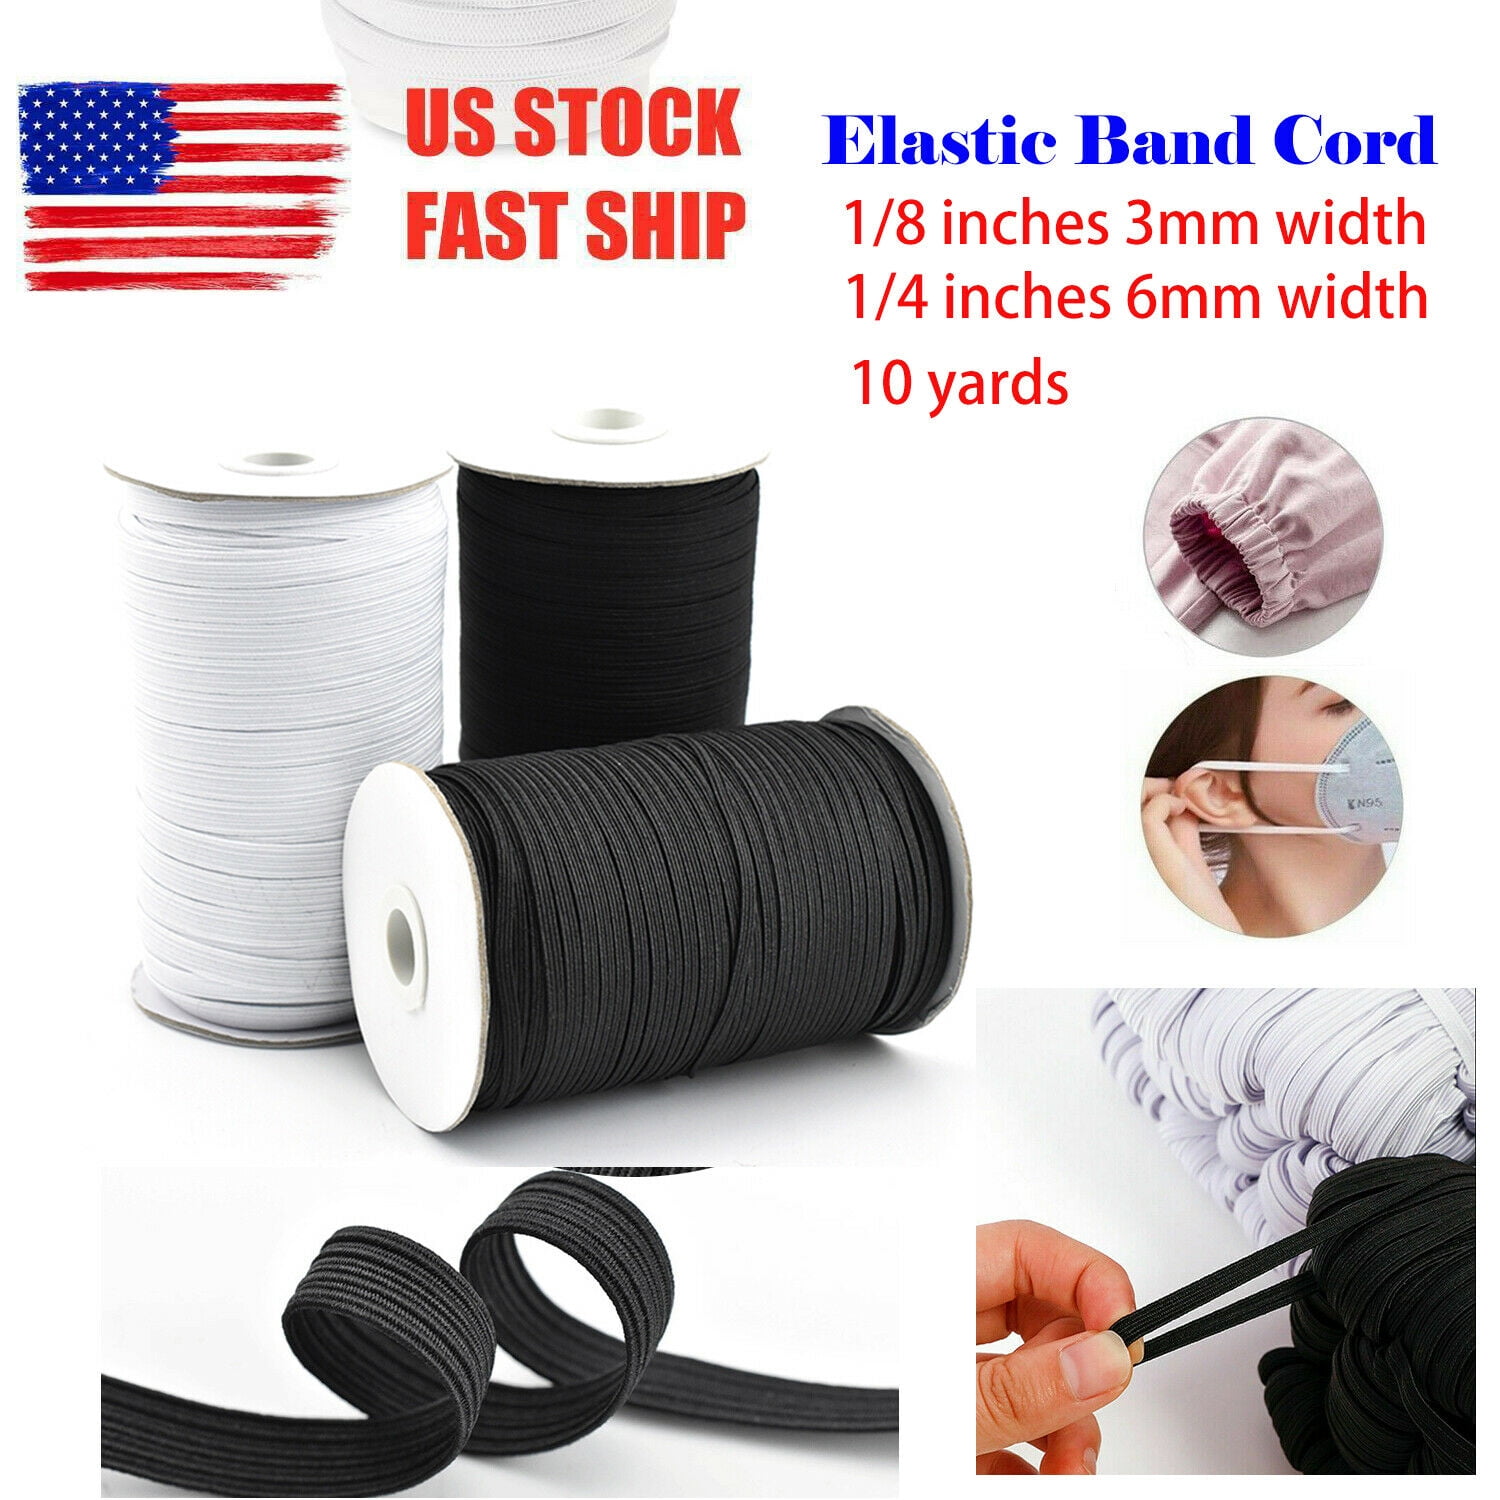 100 Yards Black & White Elastic Sewing Crafting Mask Making 1/3 Inches 8 mm 